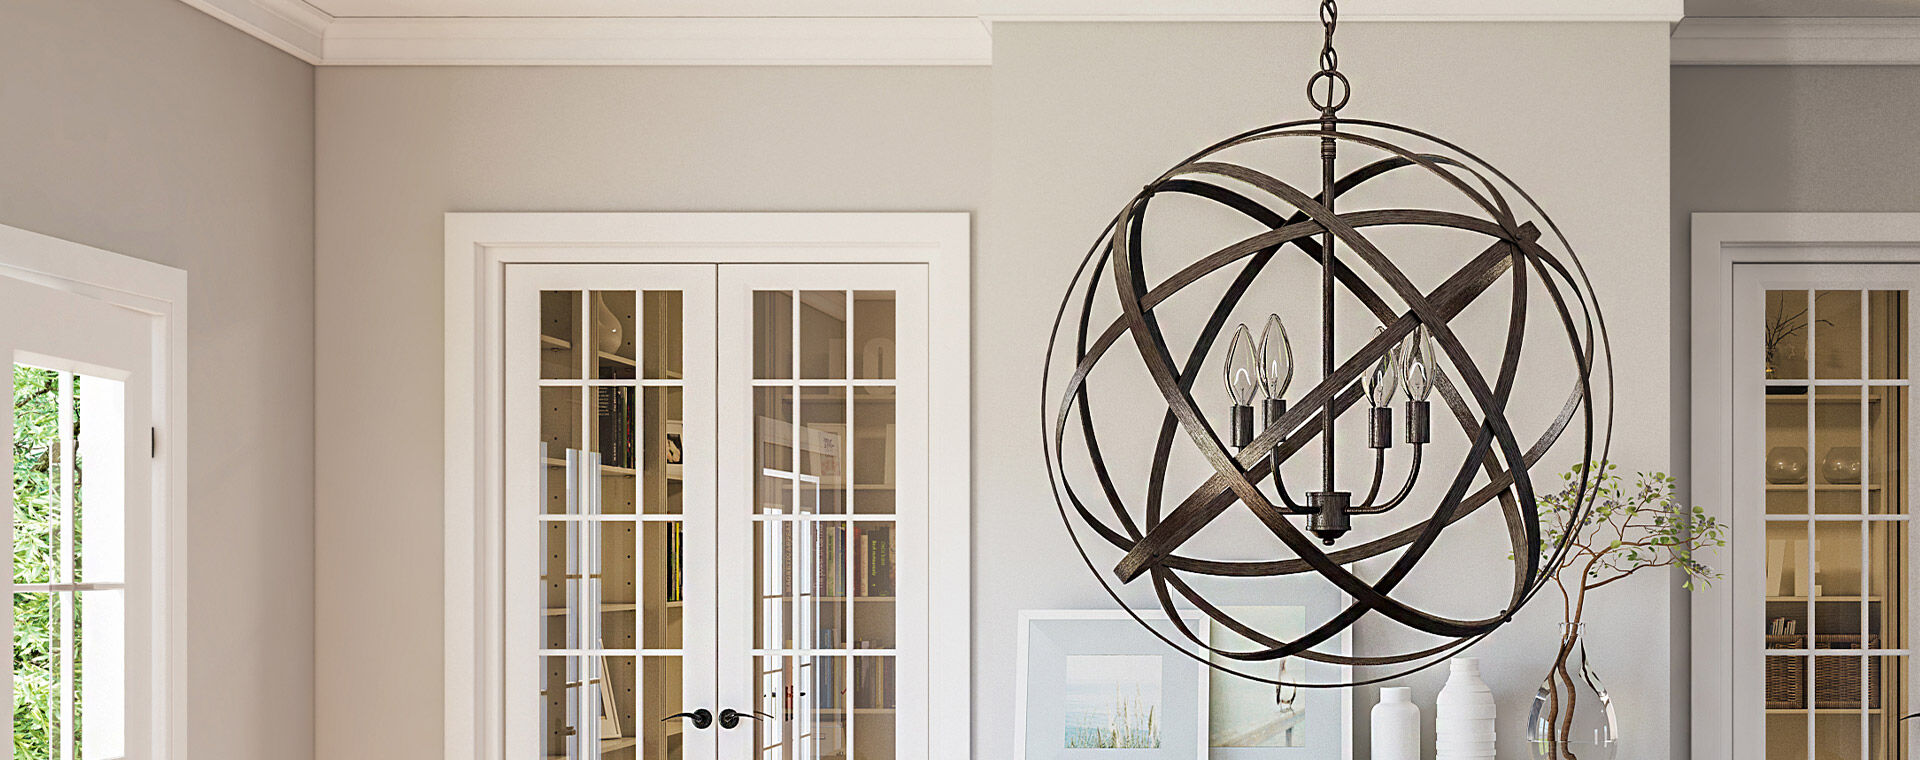 Decorate with Light | Let your personality shine throughout your home.